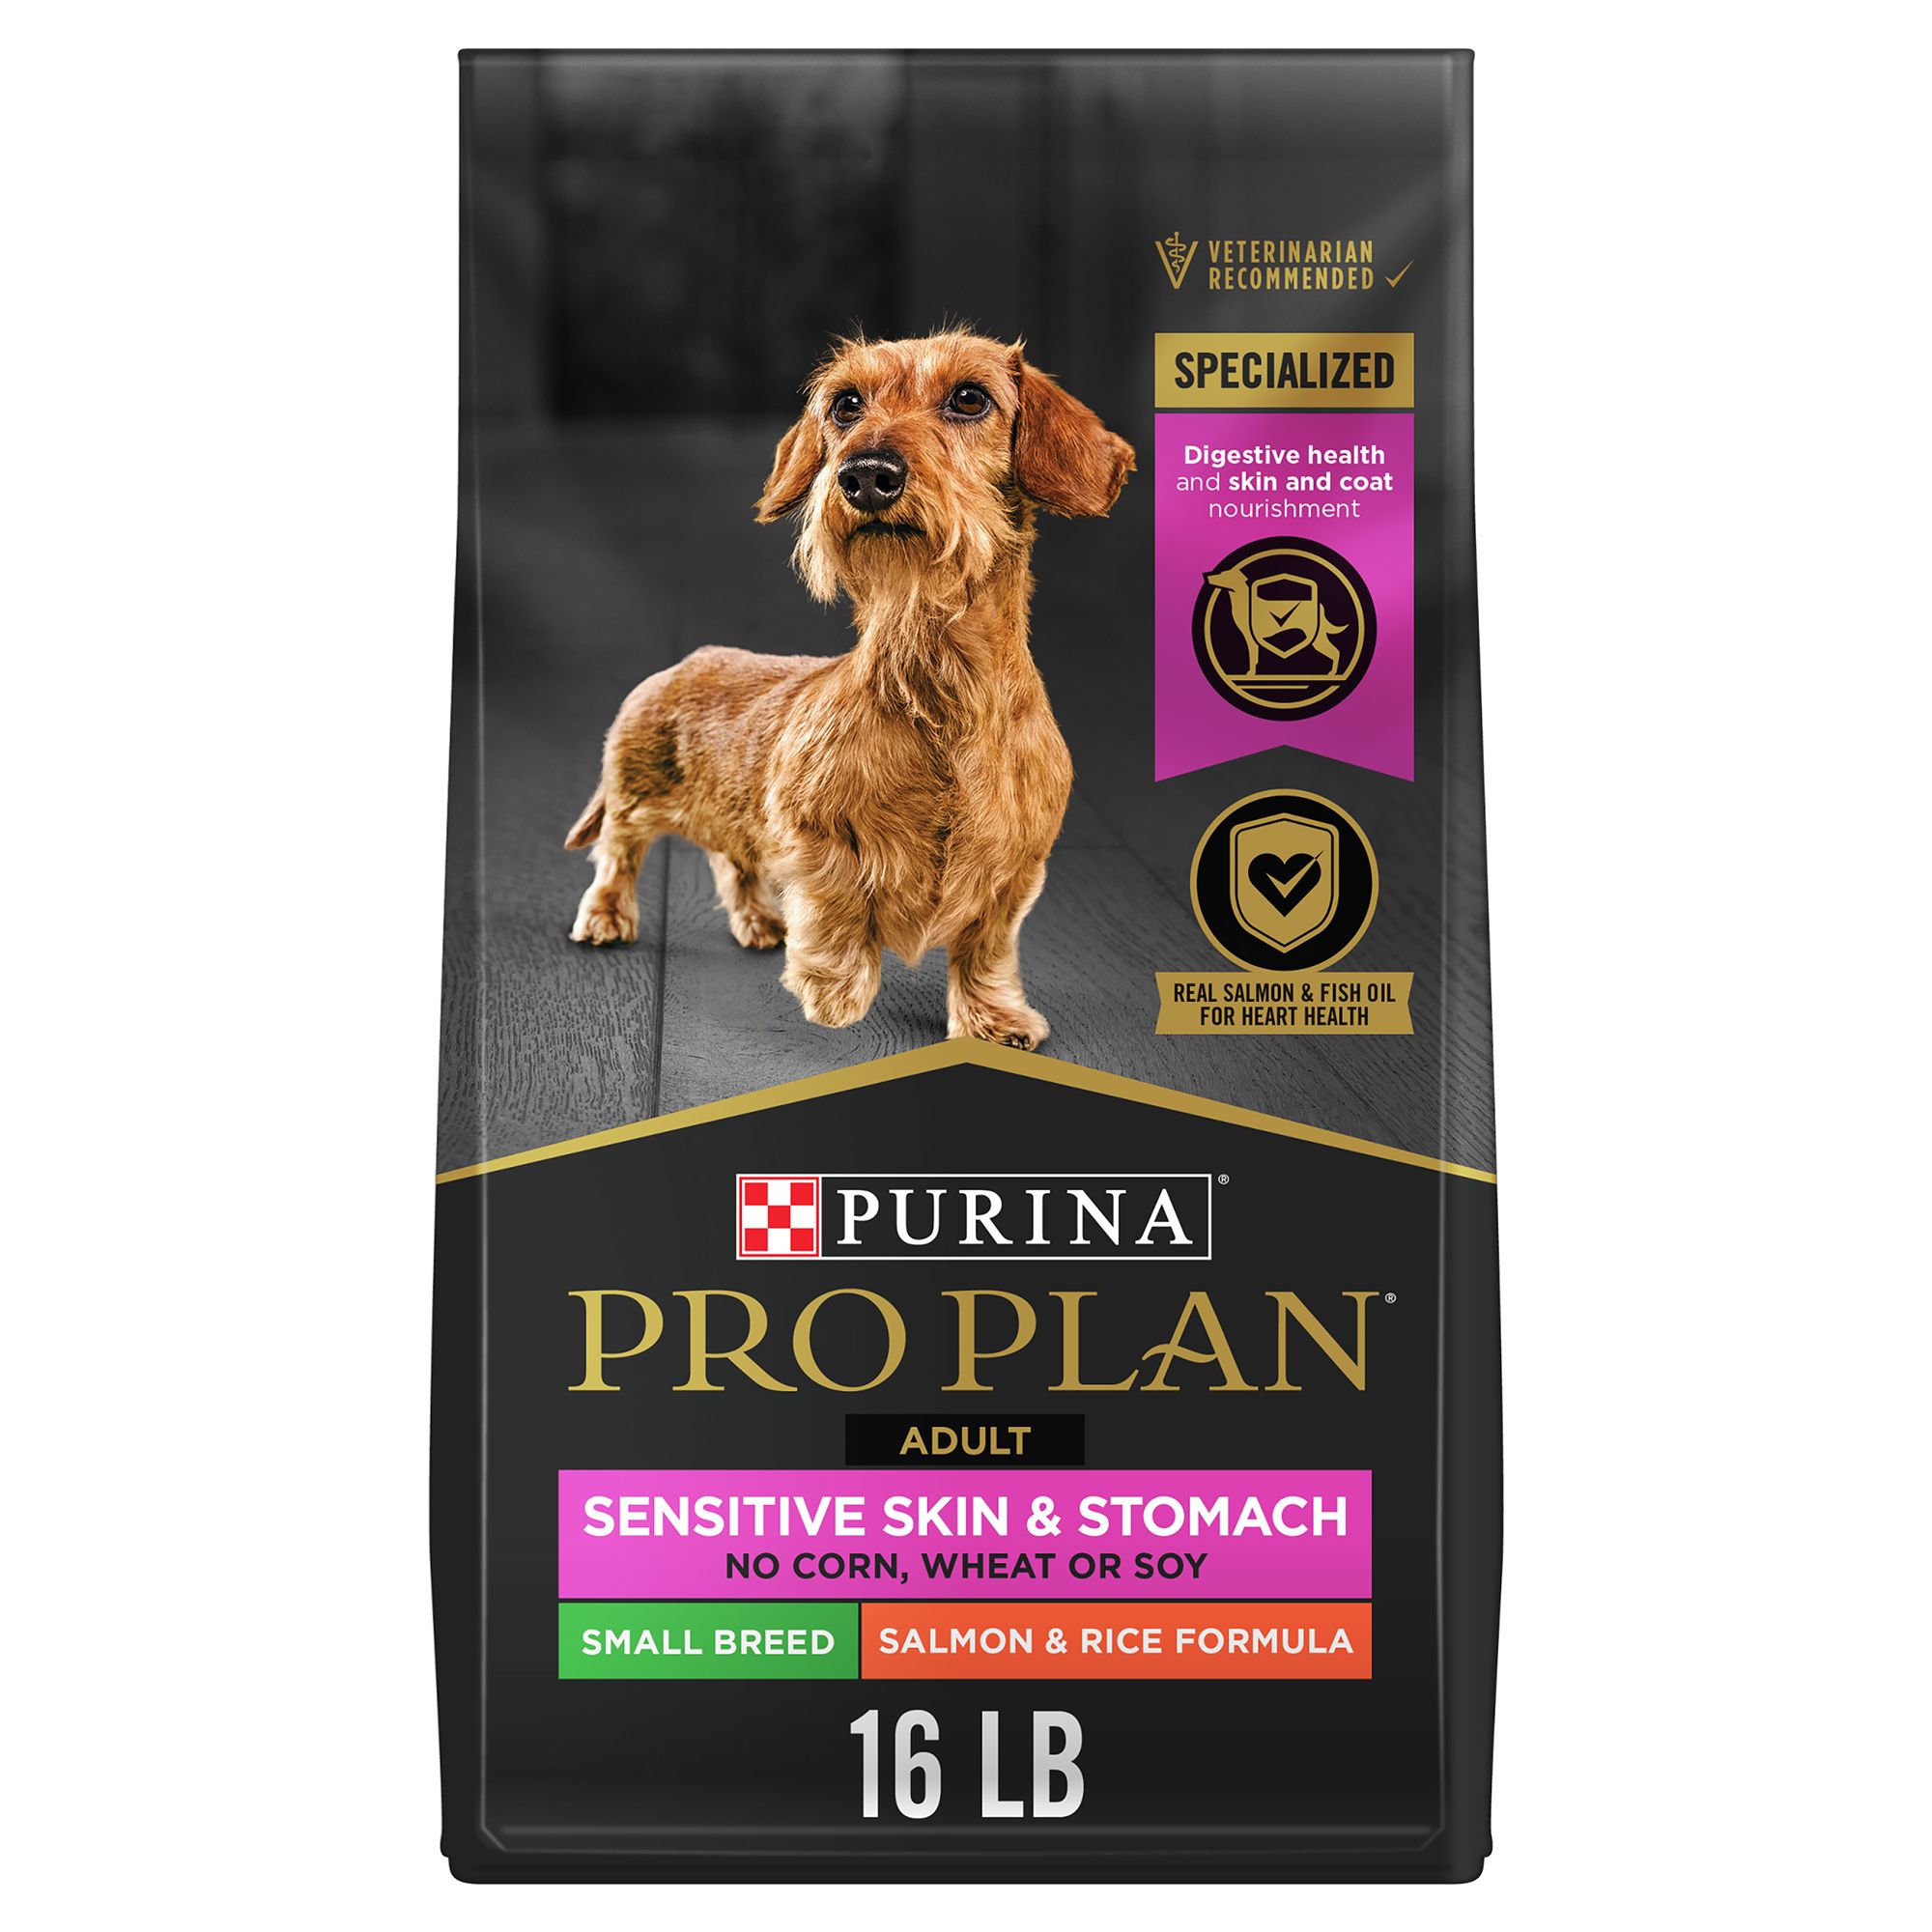 purina dog food for small dogs